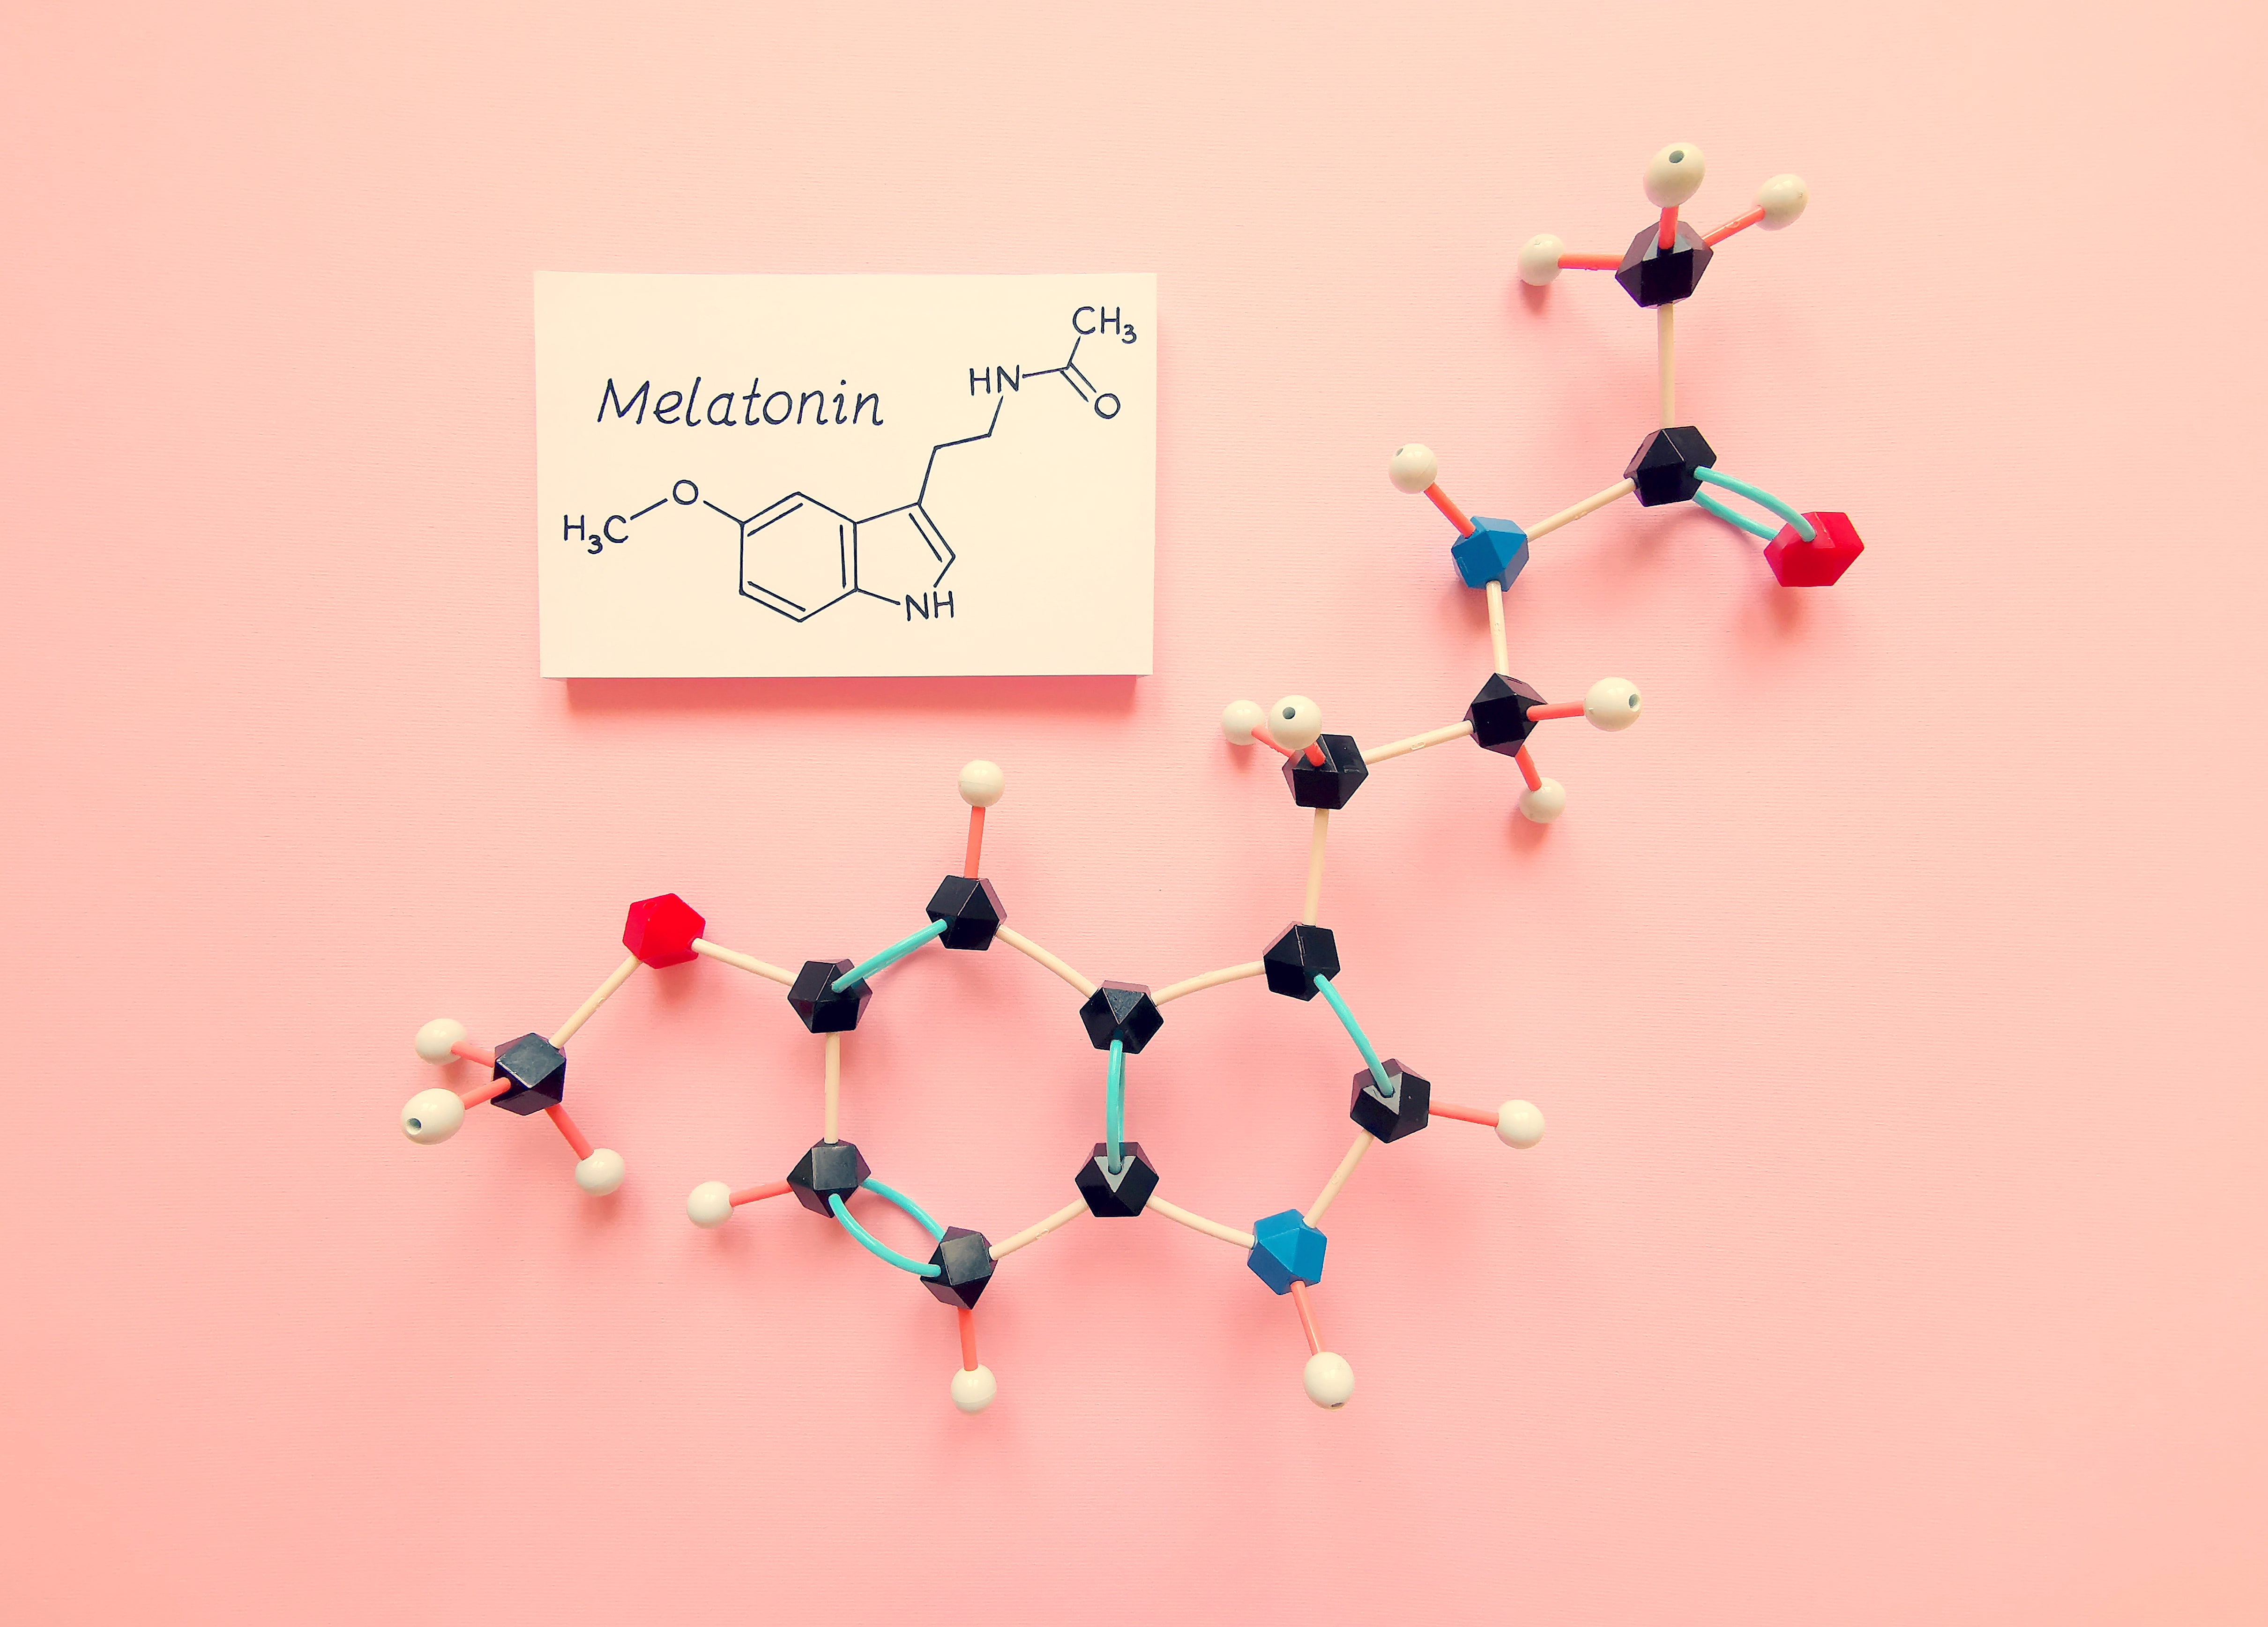 What Does Melatonin Have to Do With COVID-19?